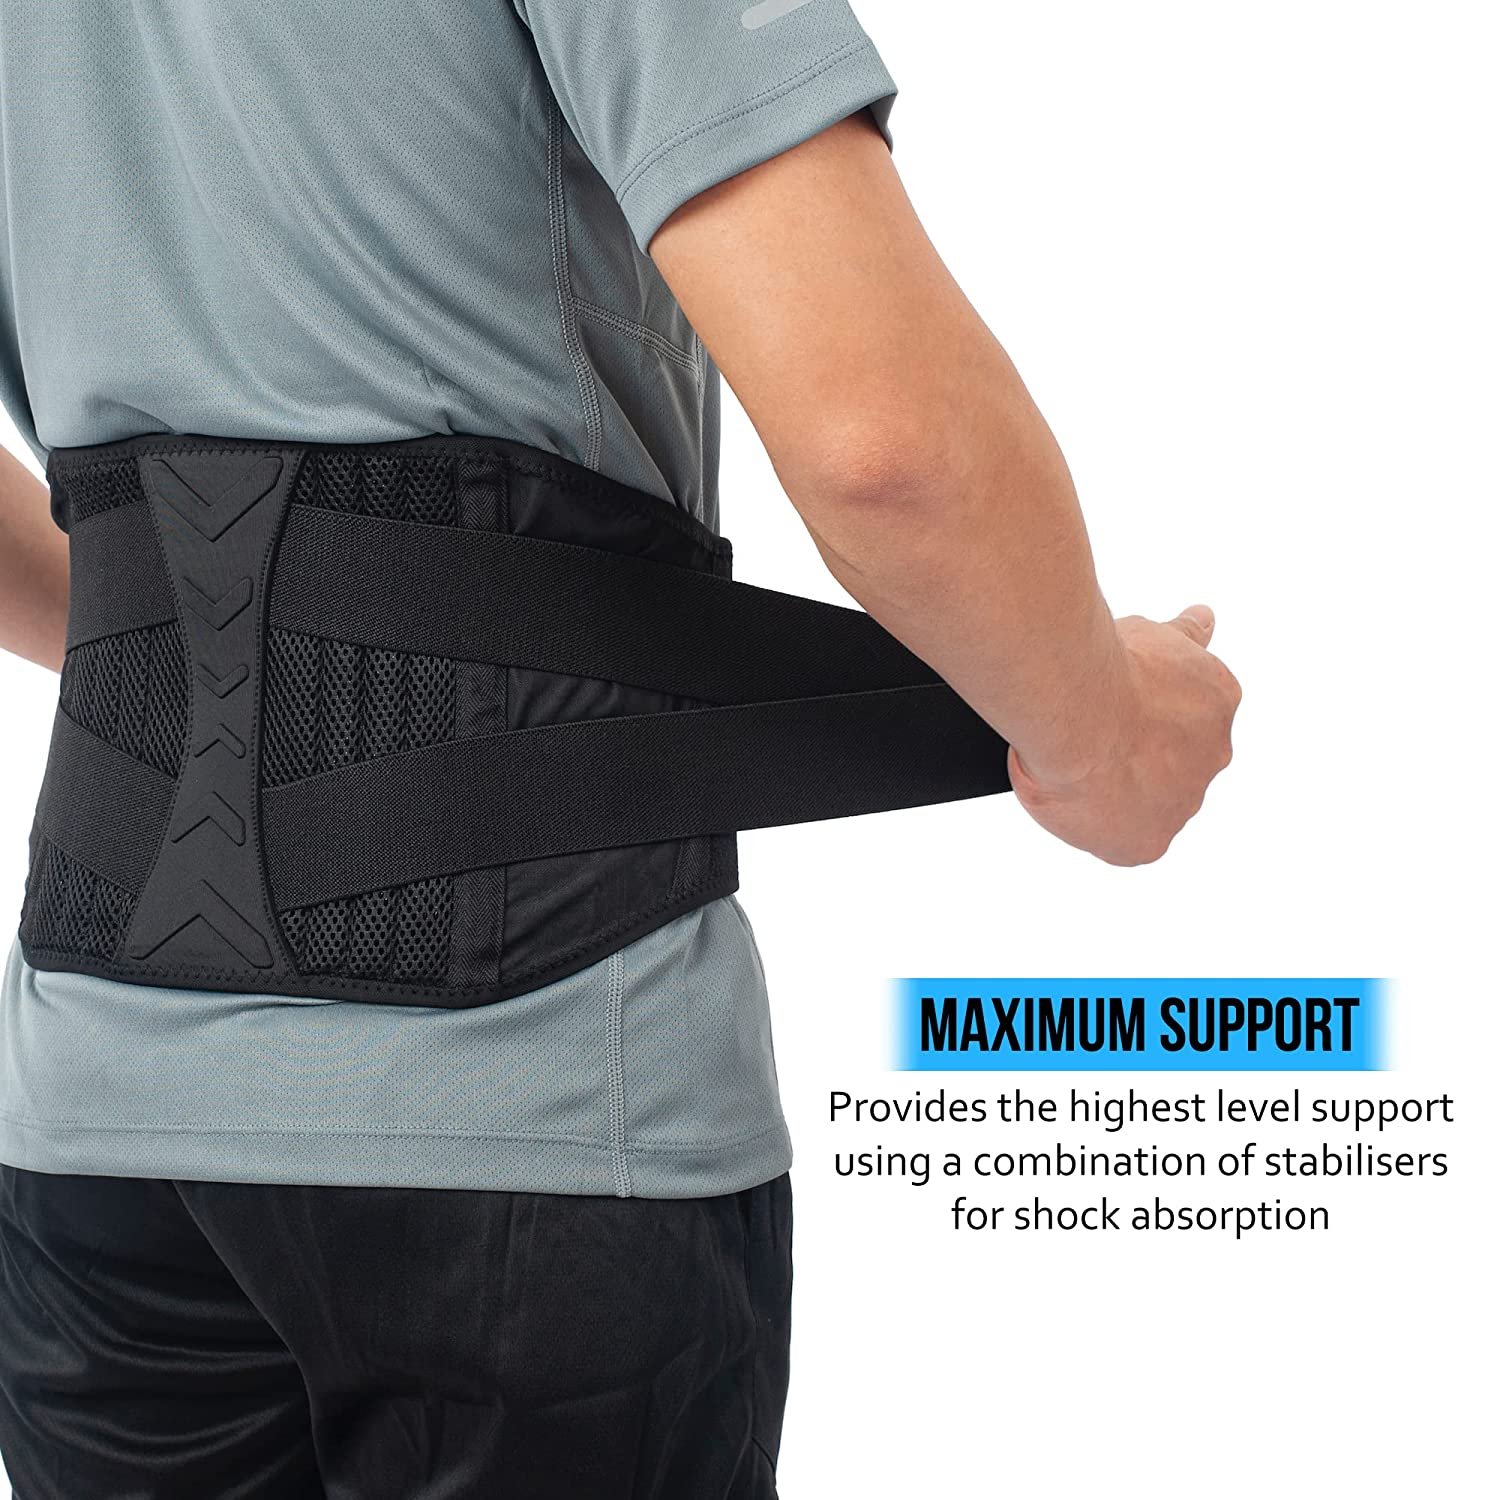 Pin on Back Pain Treatment  Braces, Belts & Supports for Lower